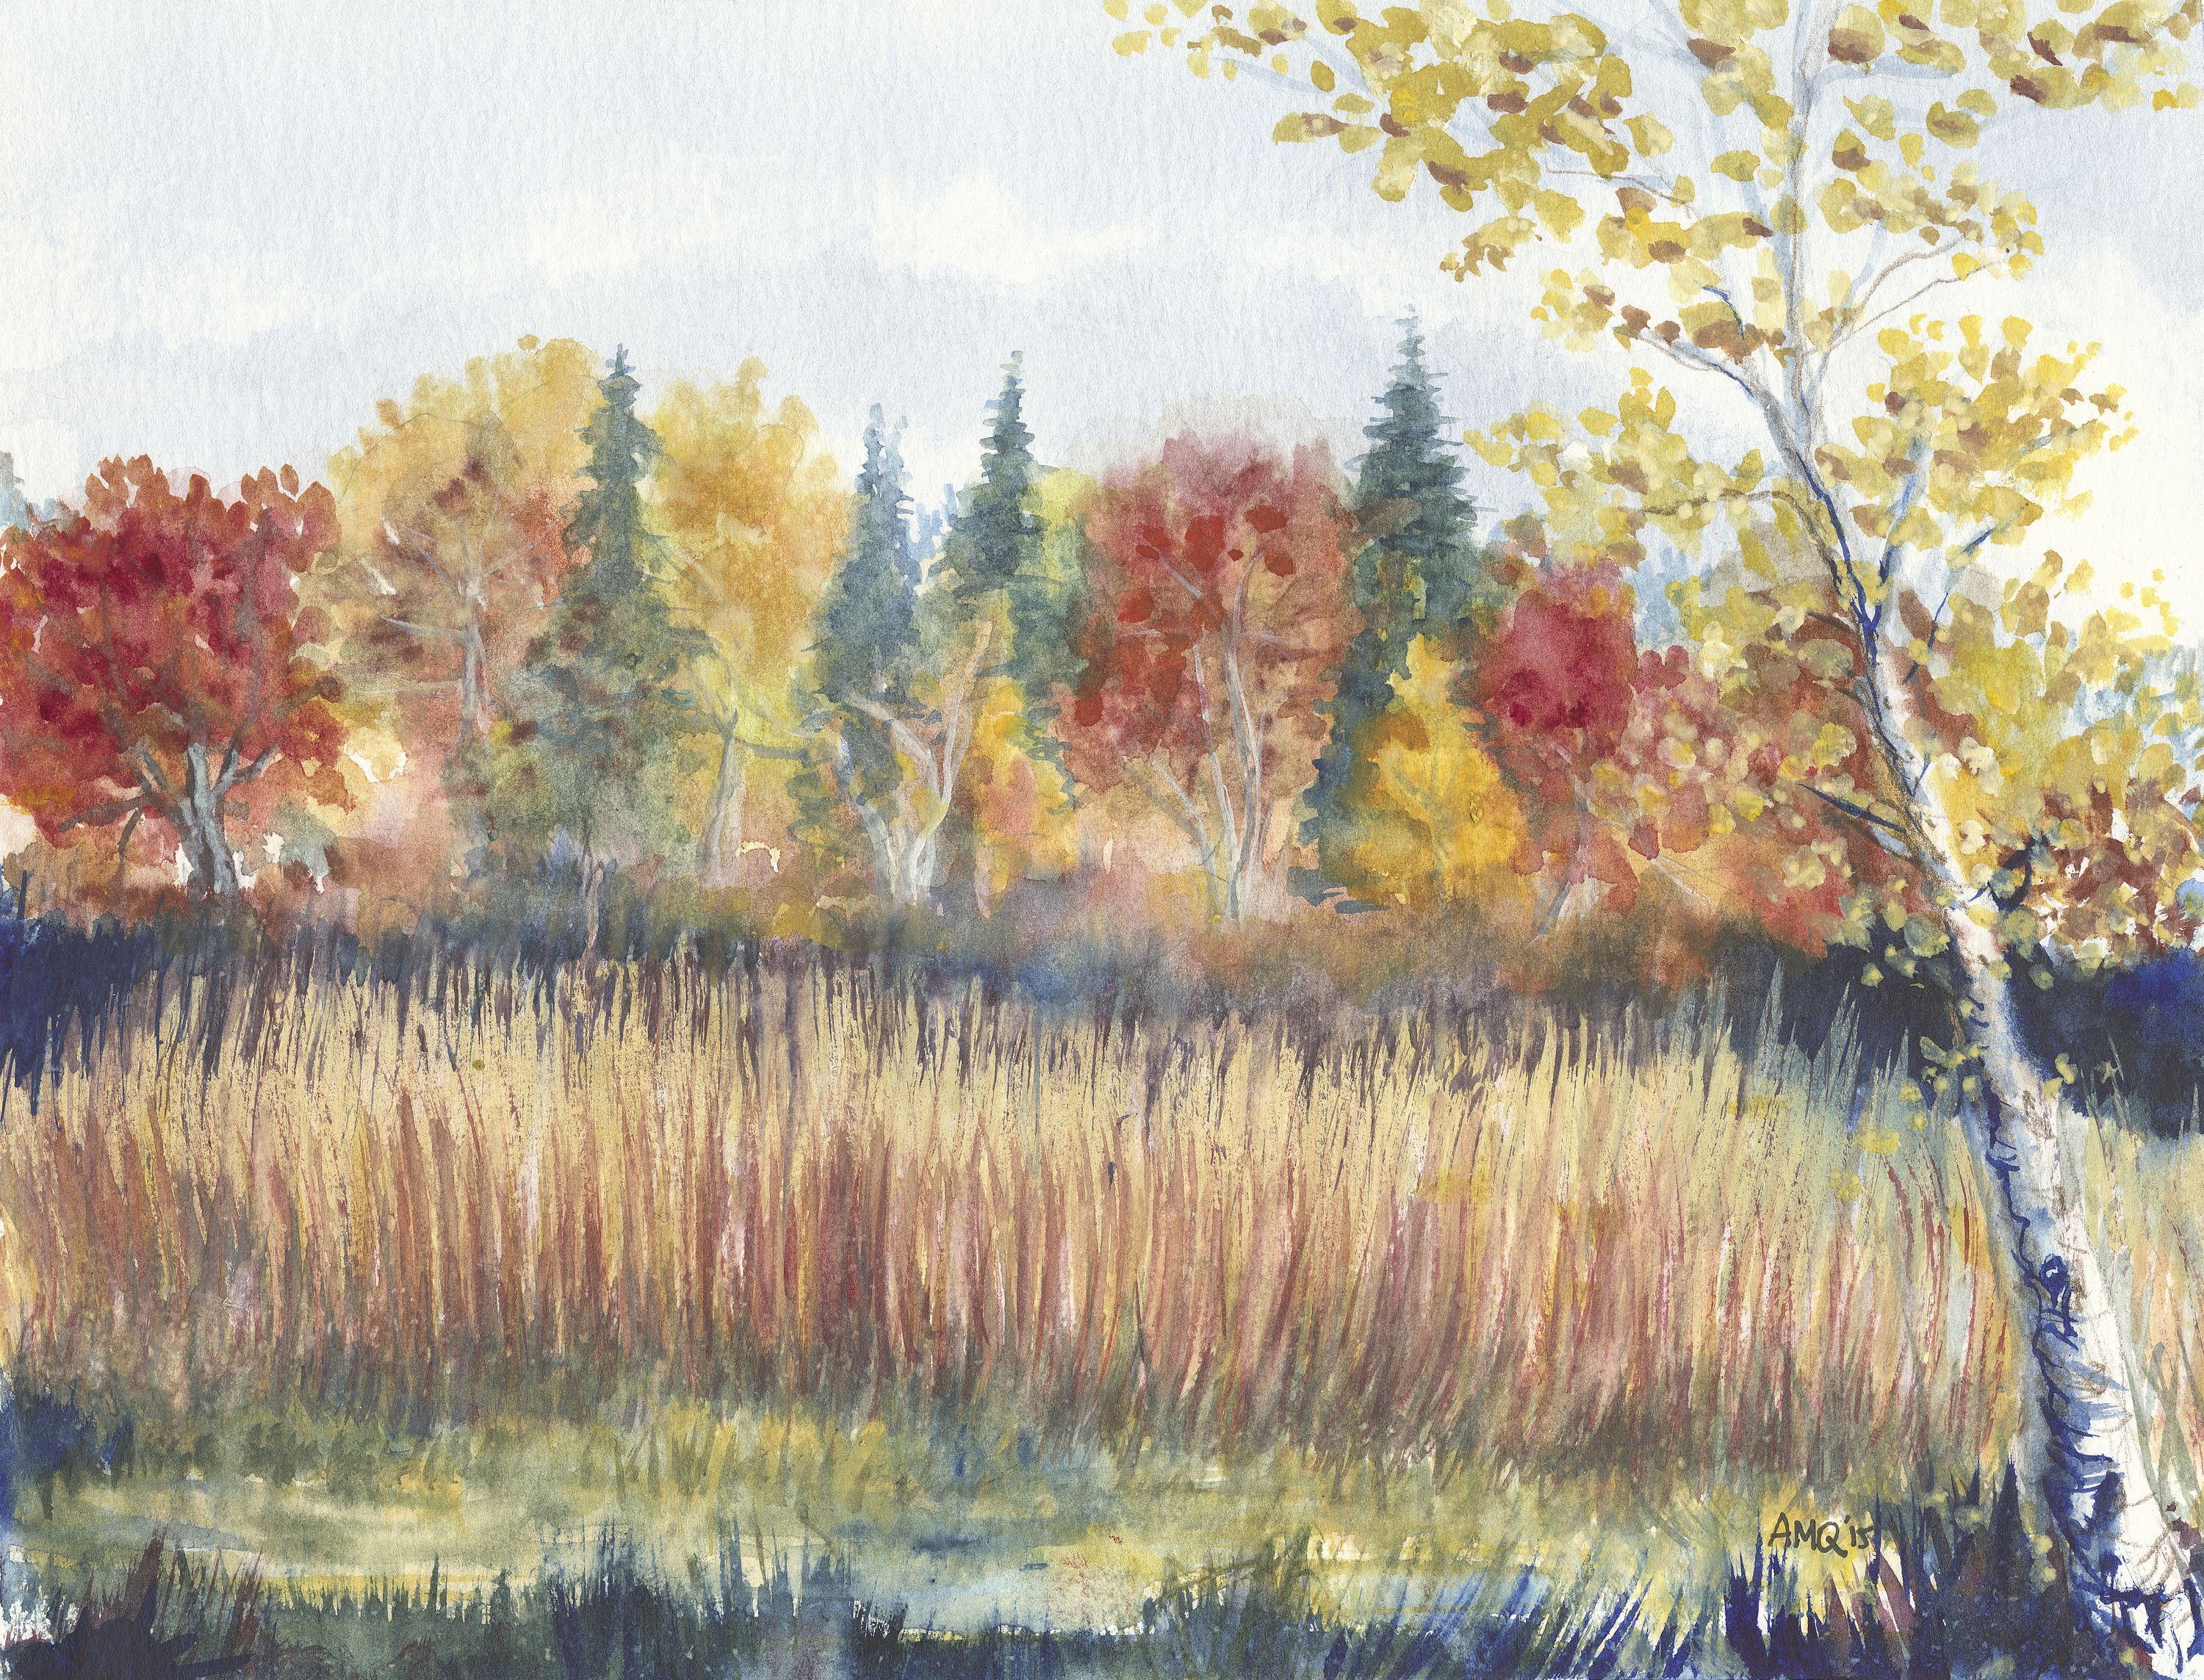 The Field at Parker Woodland - Watercolor by Aileen Quinn